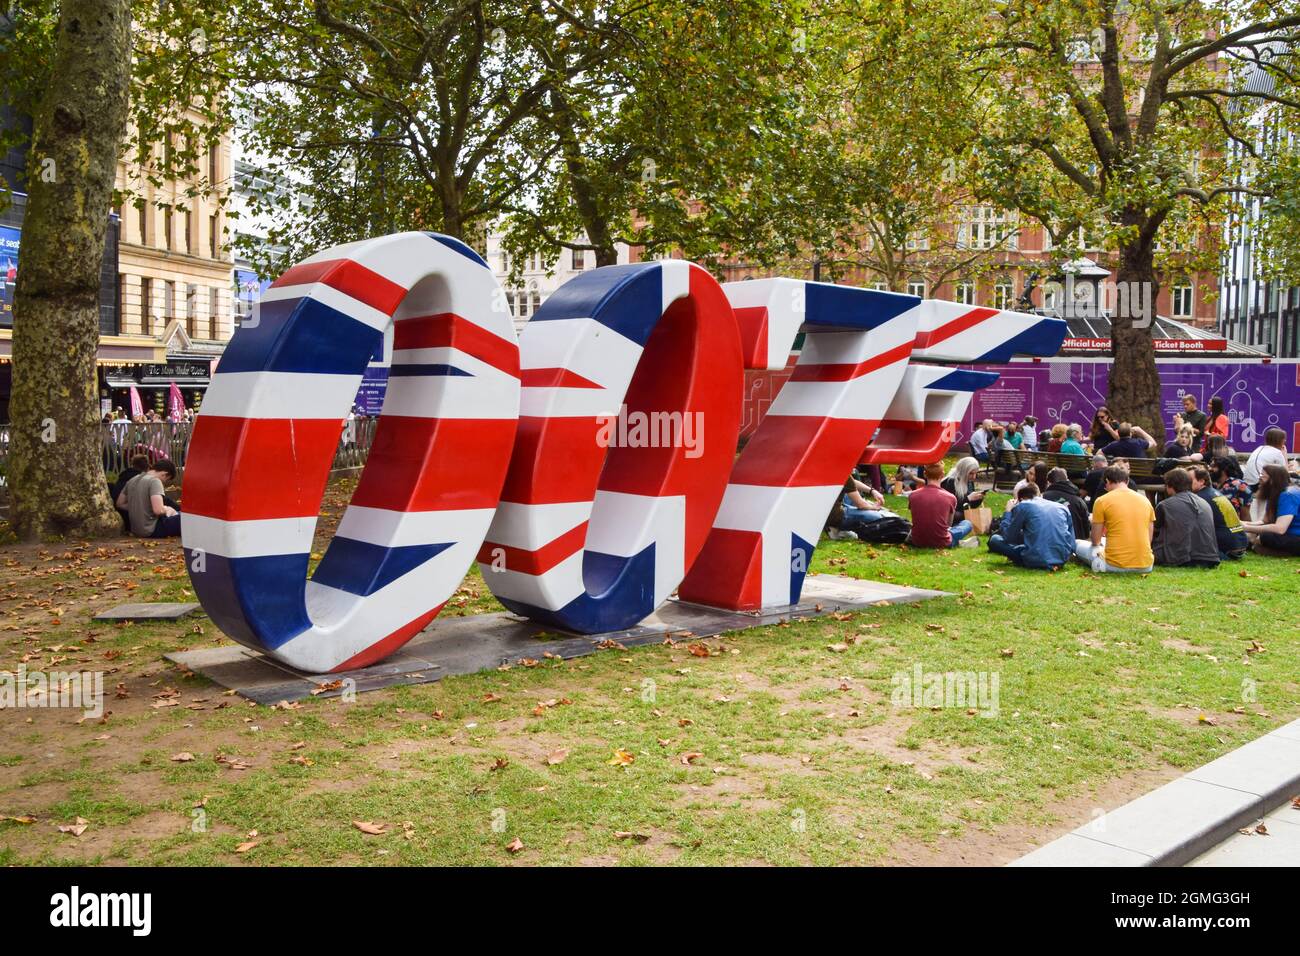 London, United Kingdom. 18th September 2021. The famous 007 logo was unveiled in Leicester Square ahead of the release of the latest James Bond movie, No Time To Die, which opens in the UK on 30 September 2021. Credit: Vuk Valcic / Alamy Live News Stock Photo